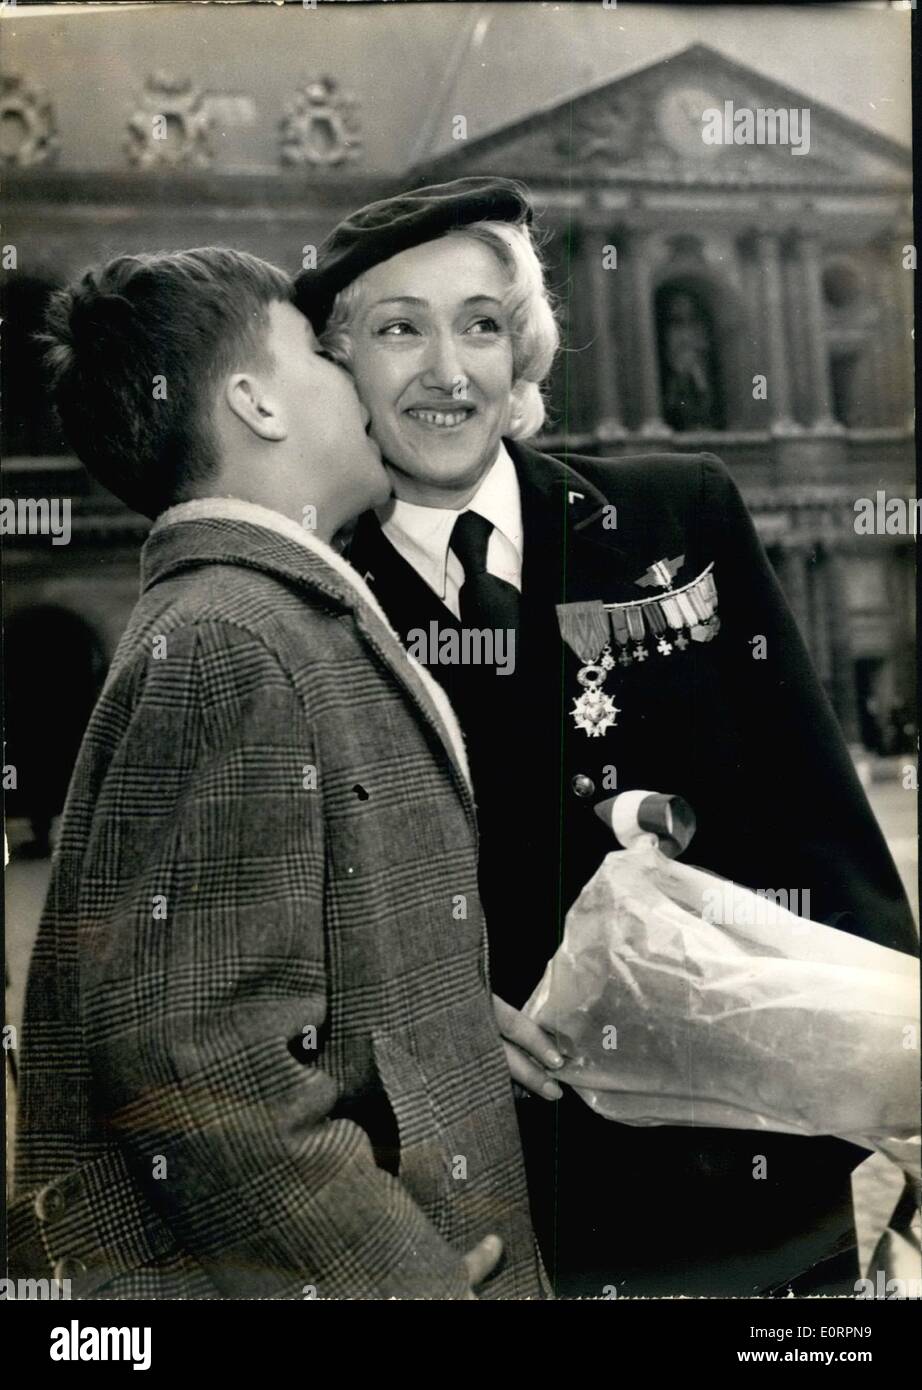 Mar. 03, 1960 - Folies Bergere dancer former member of French resistance decorated; Lydia Lova (Alias mme Kotczak Lipski), a Folie bergere dancer, former member of the French resistance was awarded the Legion D'Honneu for her activity during the German occupation. Photo Shows Ten year old Patrick kisses his heroic mother, Lydia Lova after she was awarded the insignia of the legion D'Honneur during a ceremony held at the invalides this morning. Stock Photo